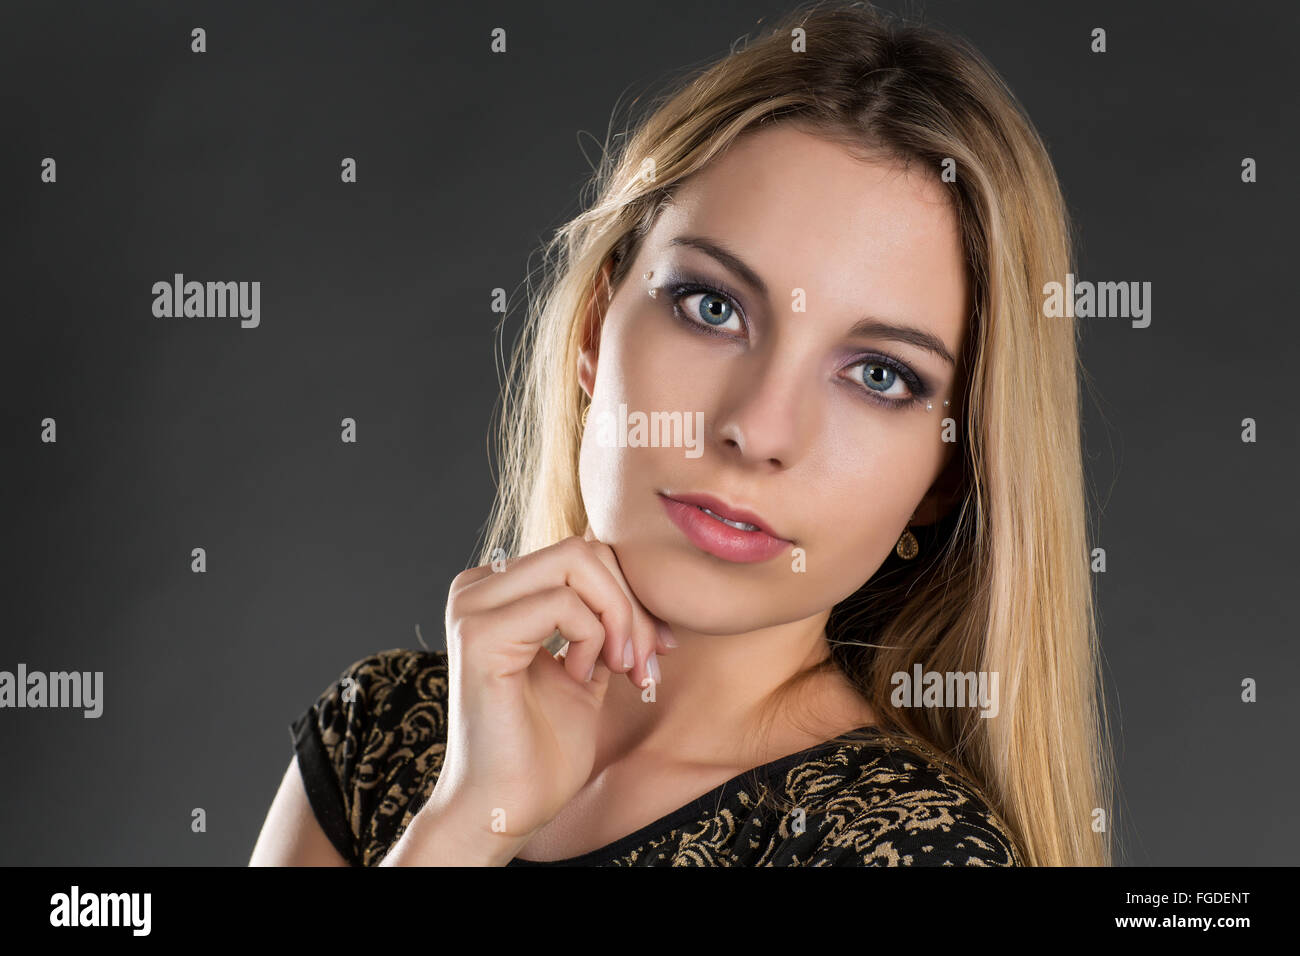 Young woman blond Stock Photo